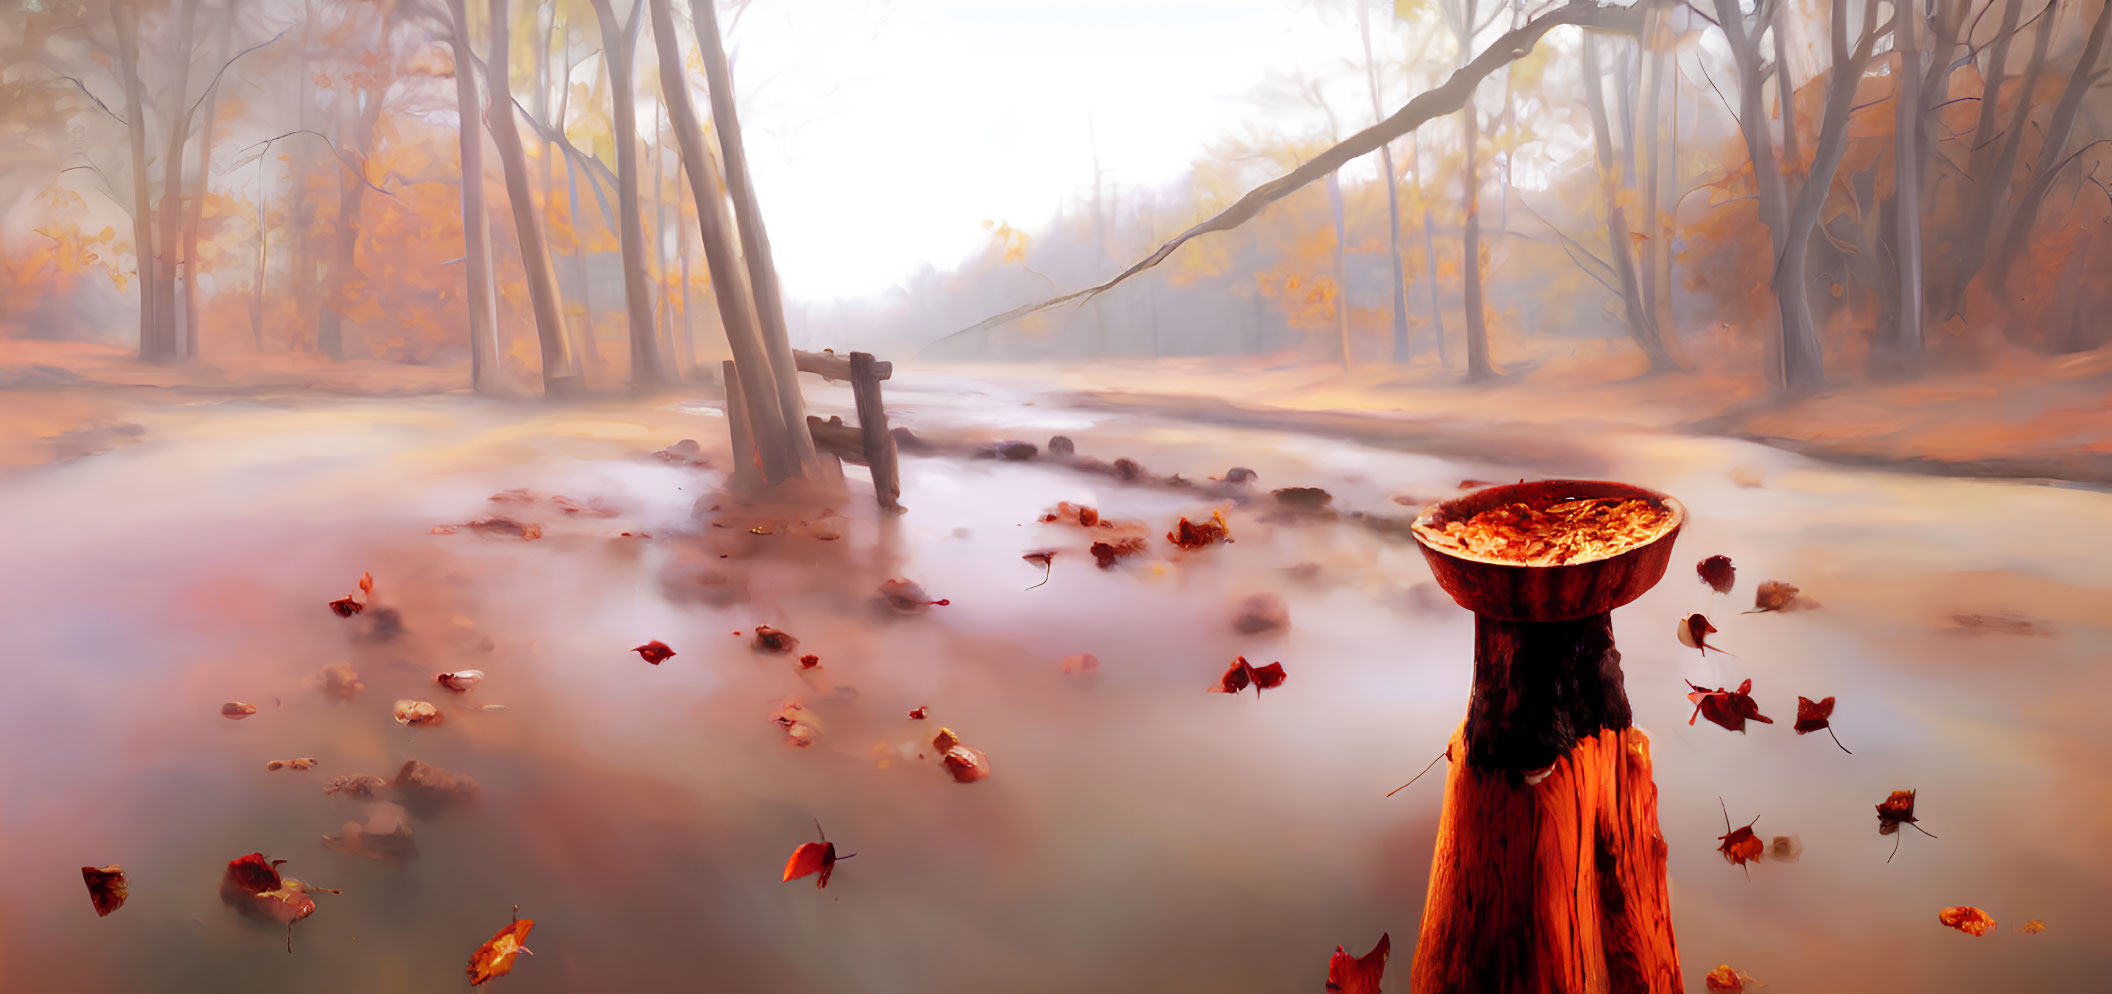 Tranquil autumn forest with fog, stream, and birdseed stump